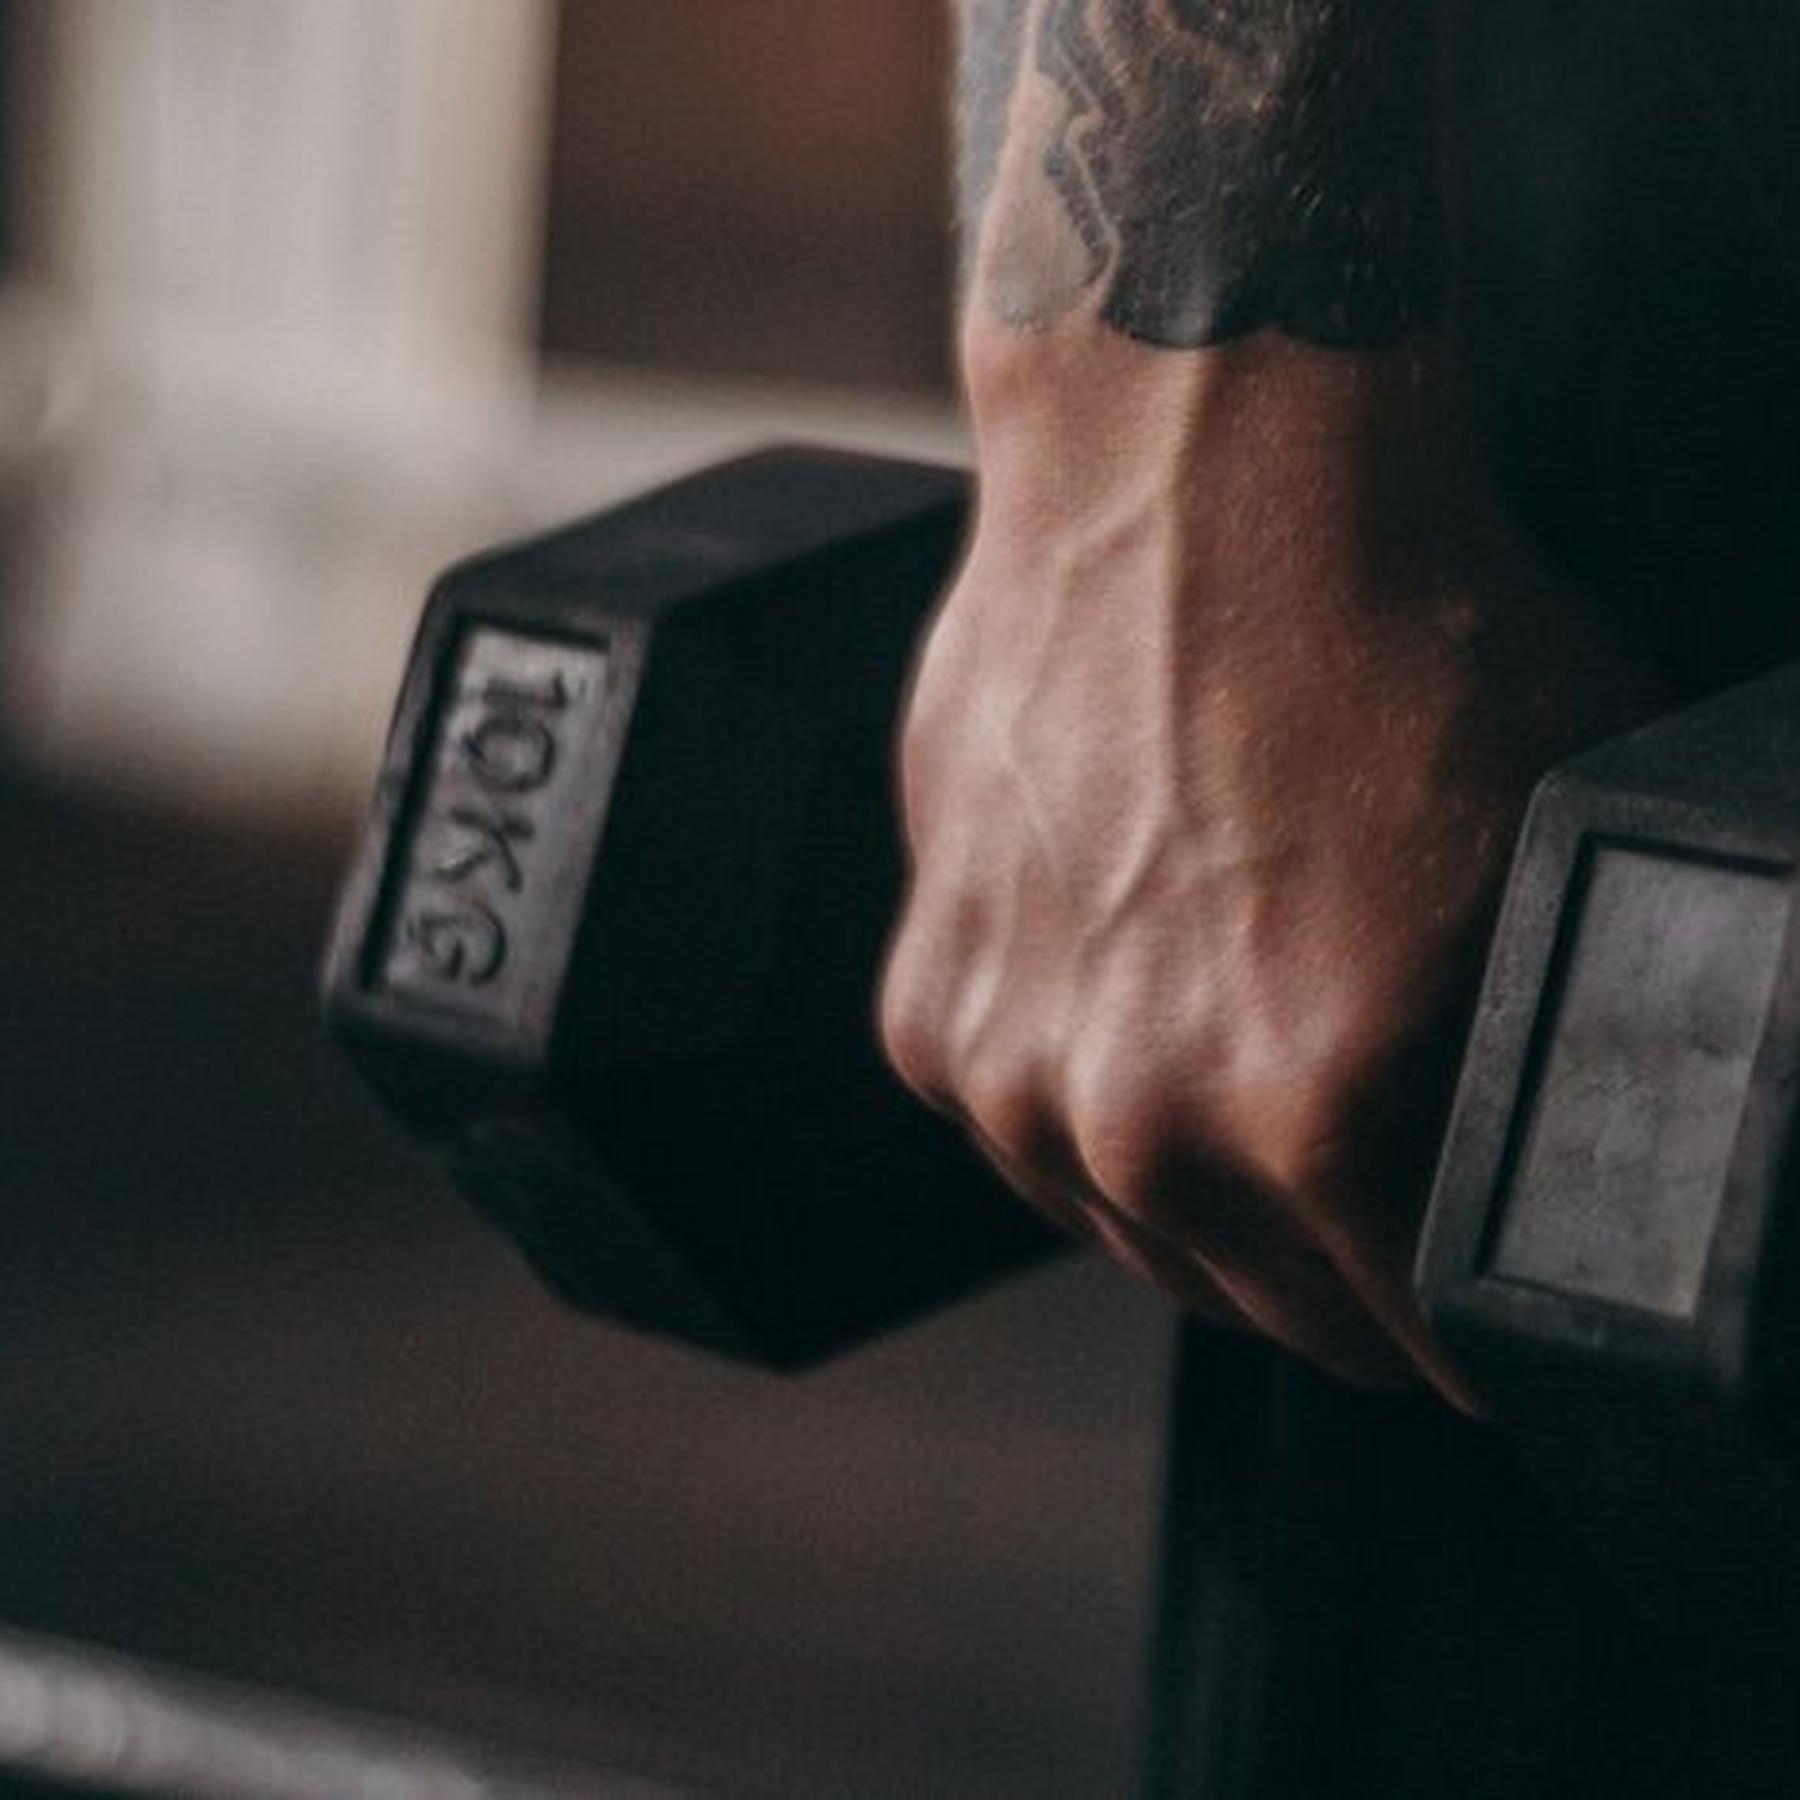 Get a Grip: 3 Ways to Increase Grip Strength